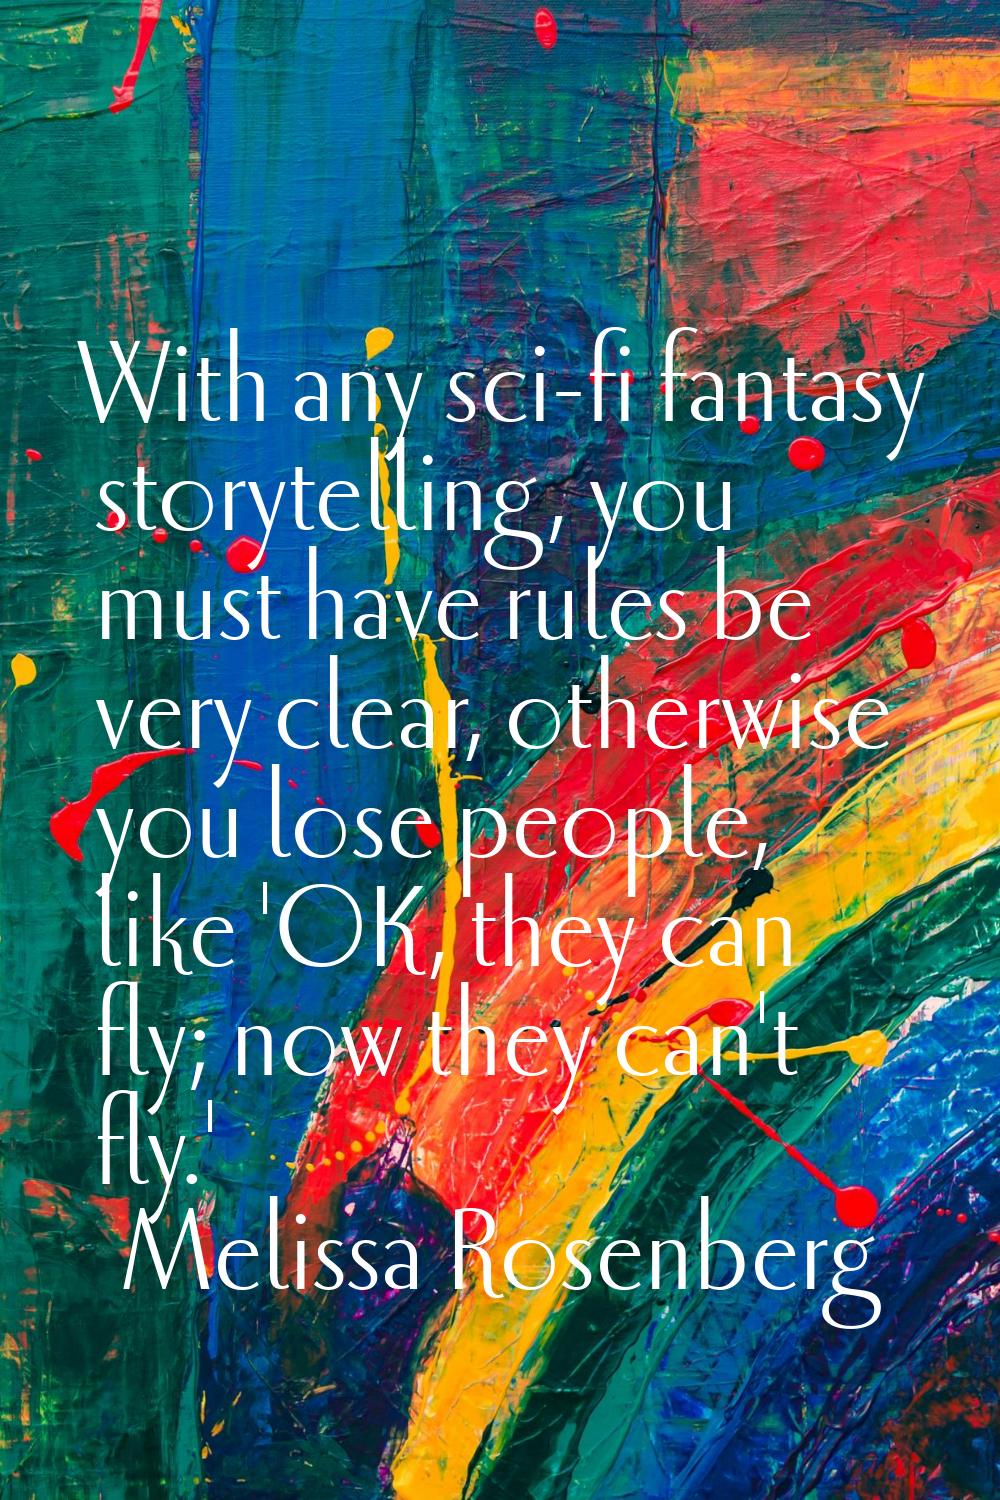 With any sci-fi fantasy storytelling, you must have rules be very clear, otherwise you lose people,